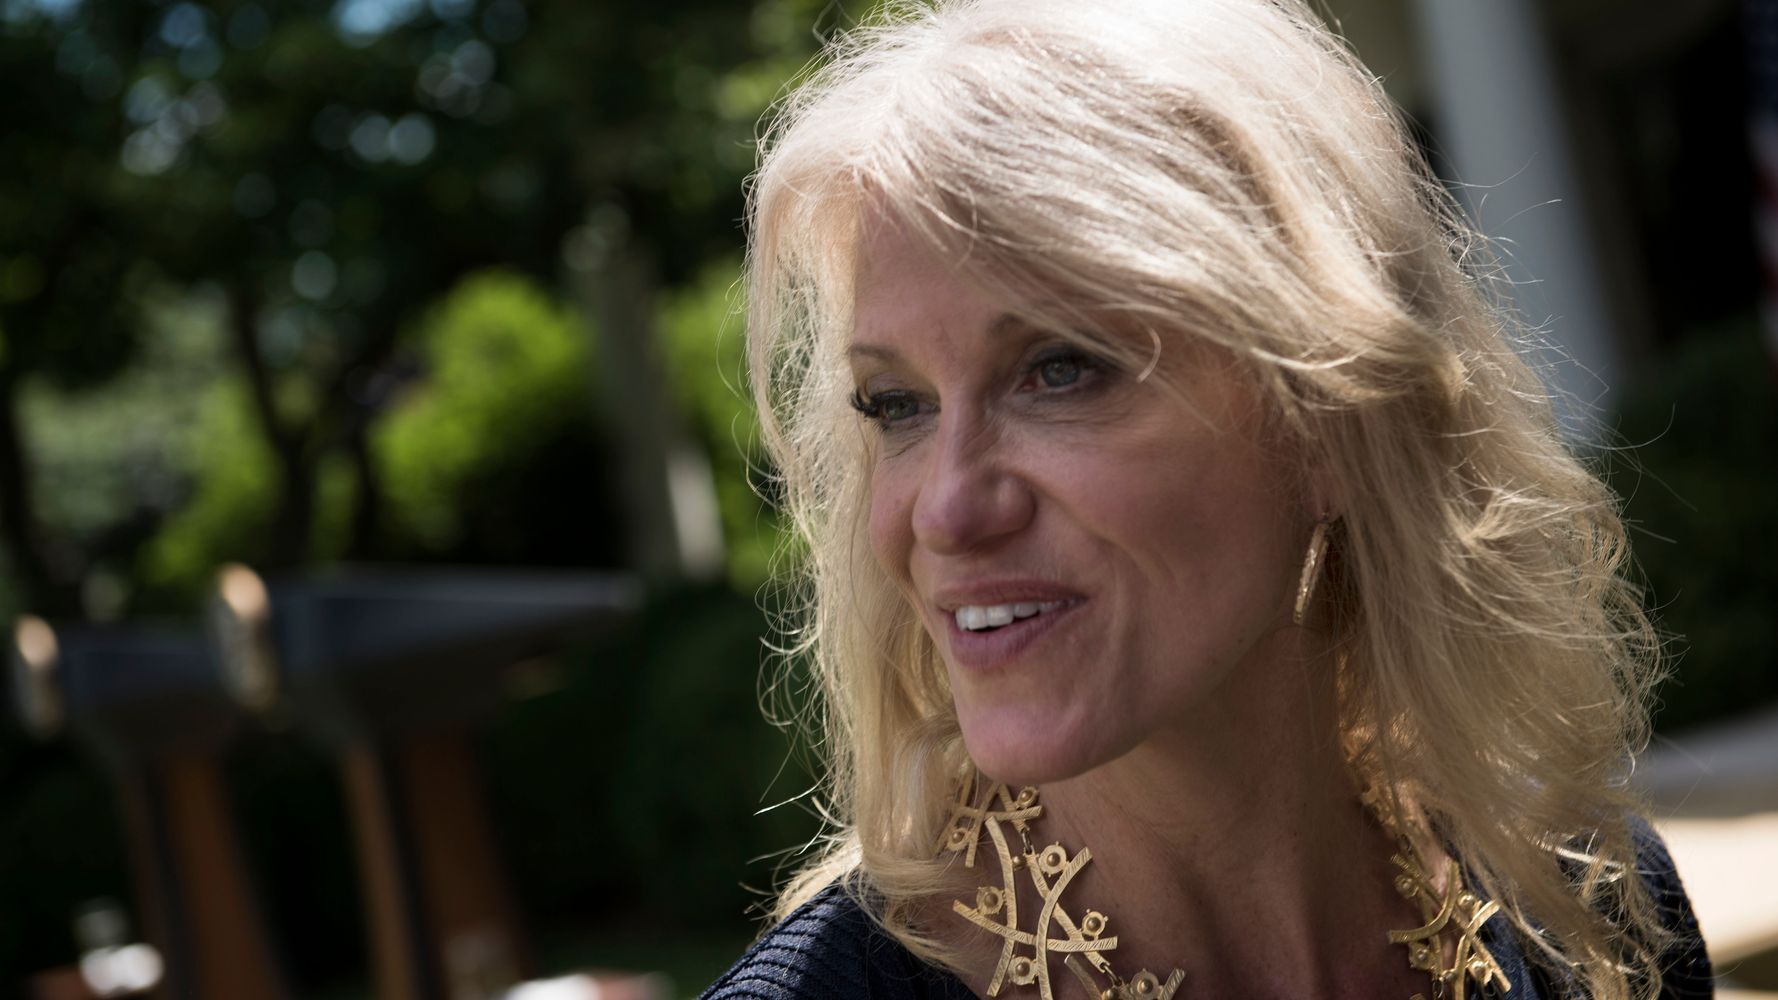 Kellyanne Conway: Being Ethical Discourages Serving In Government.